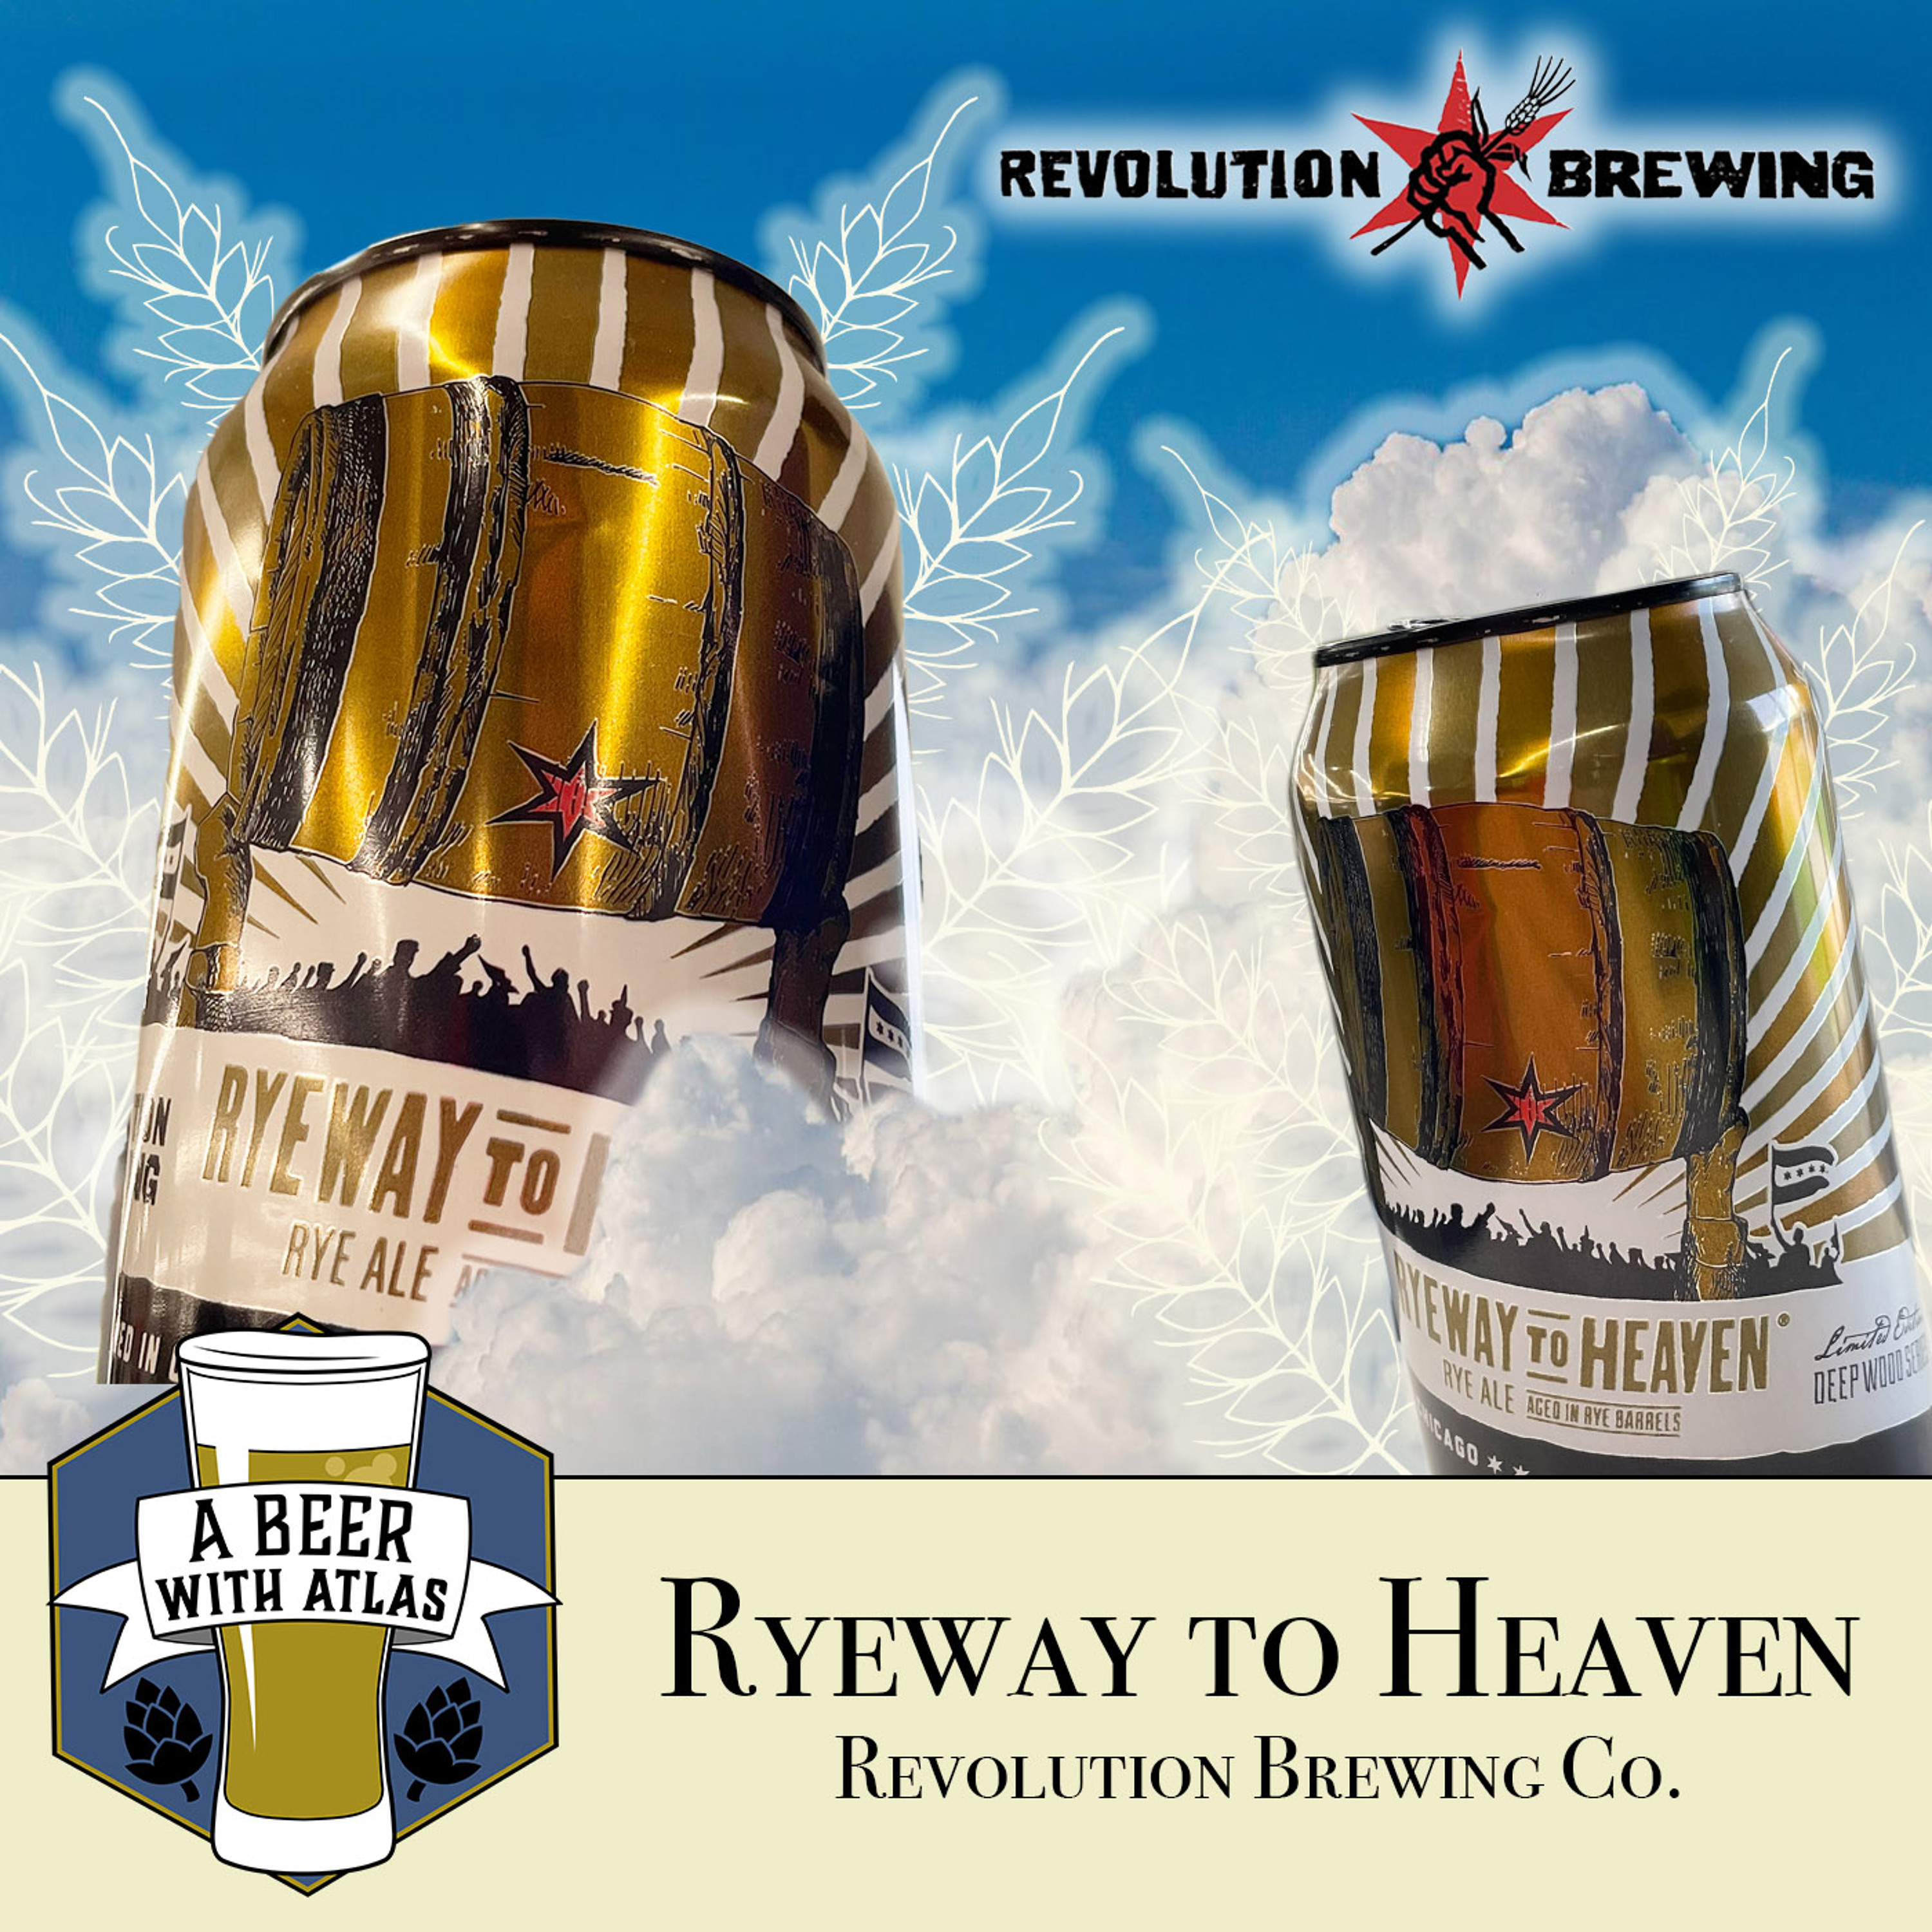 Ryeway to Heaven by Revolution Brewing Co. - A Beer with Atlas 194